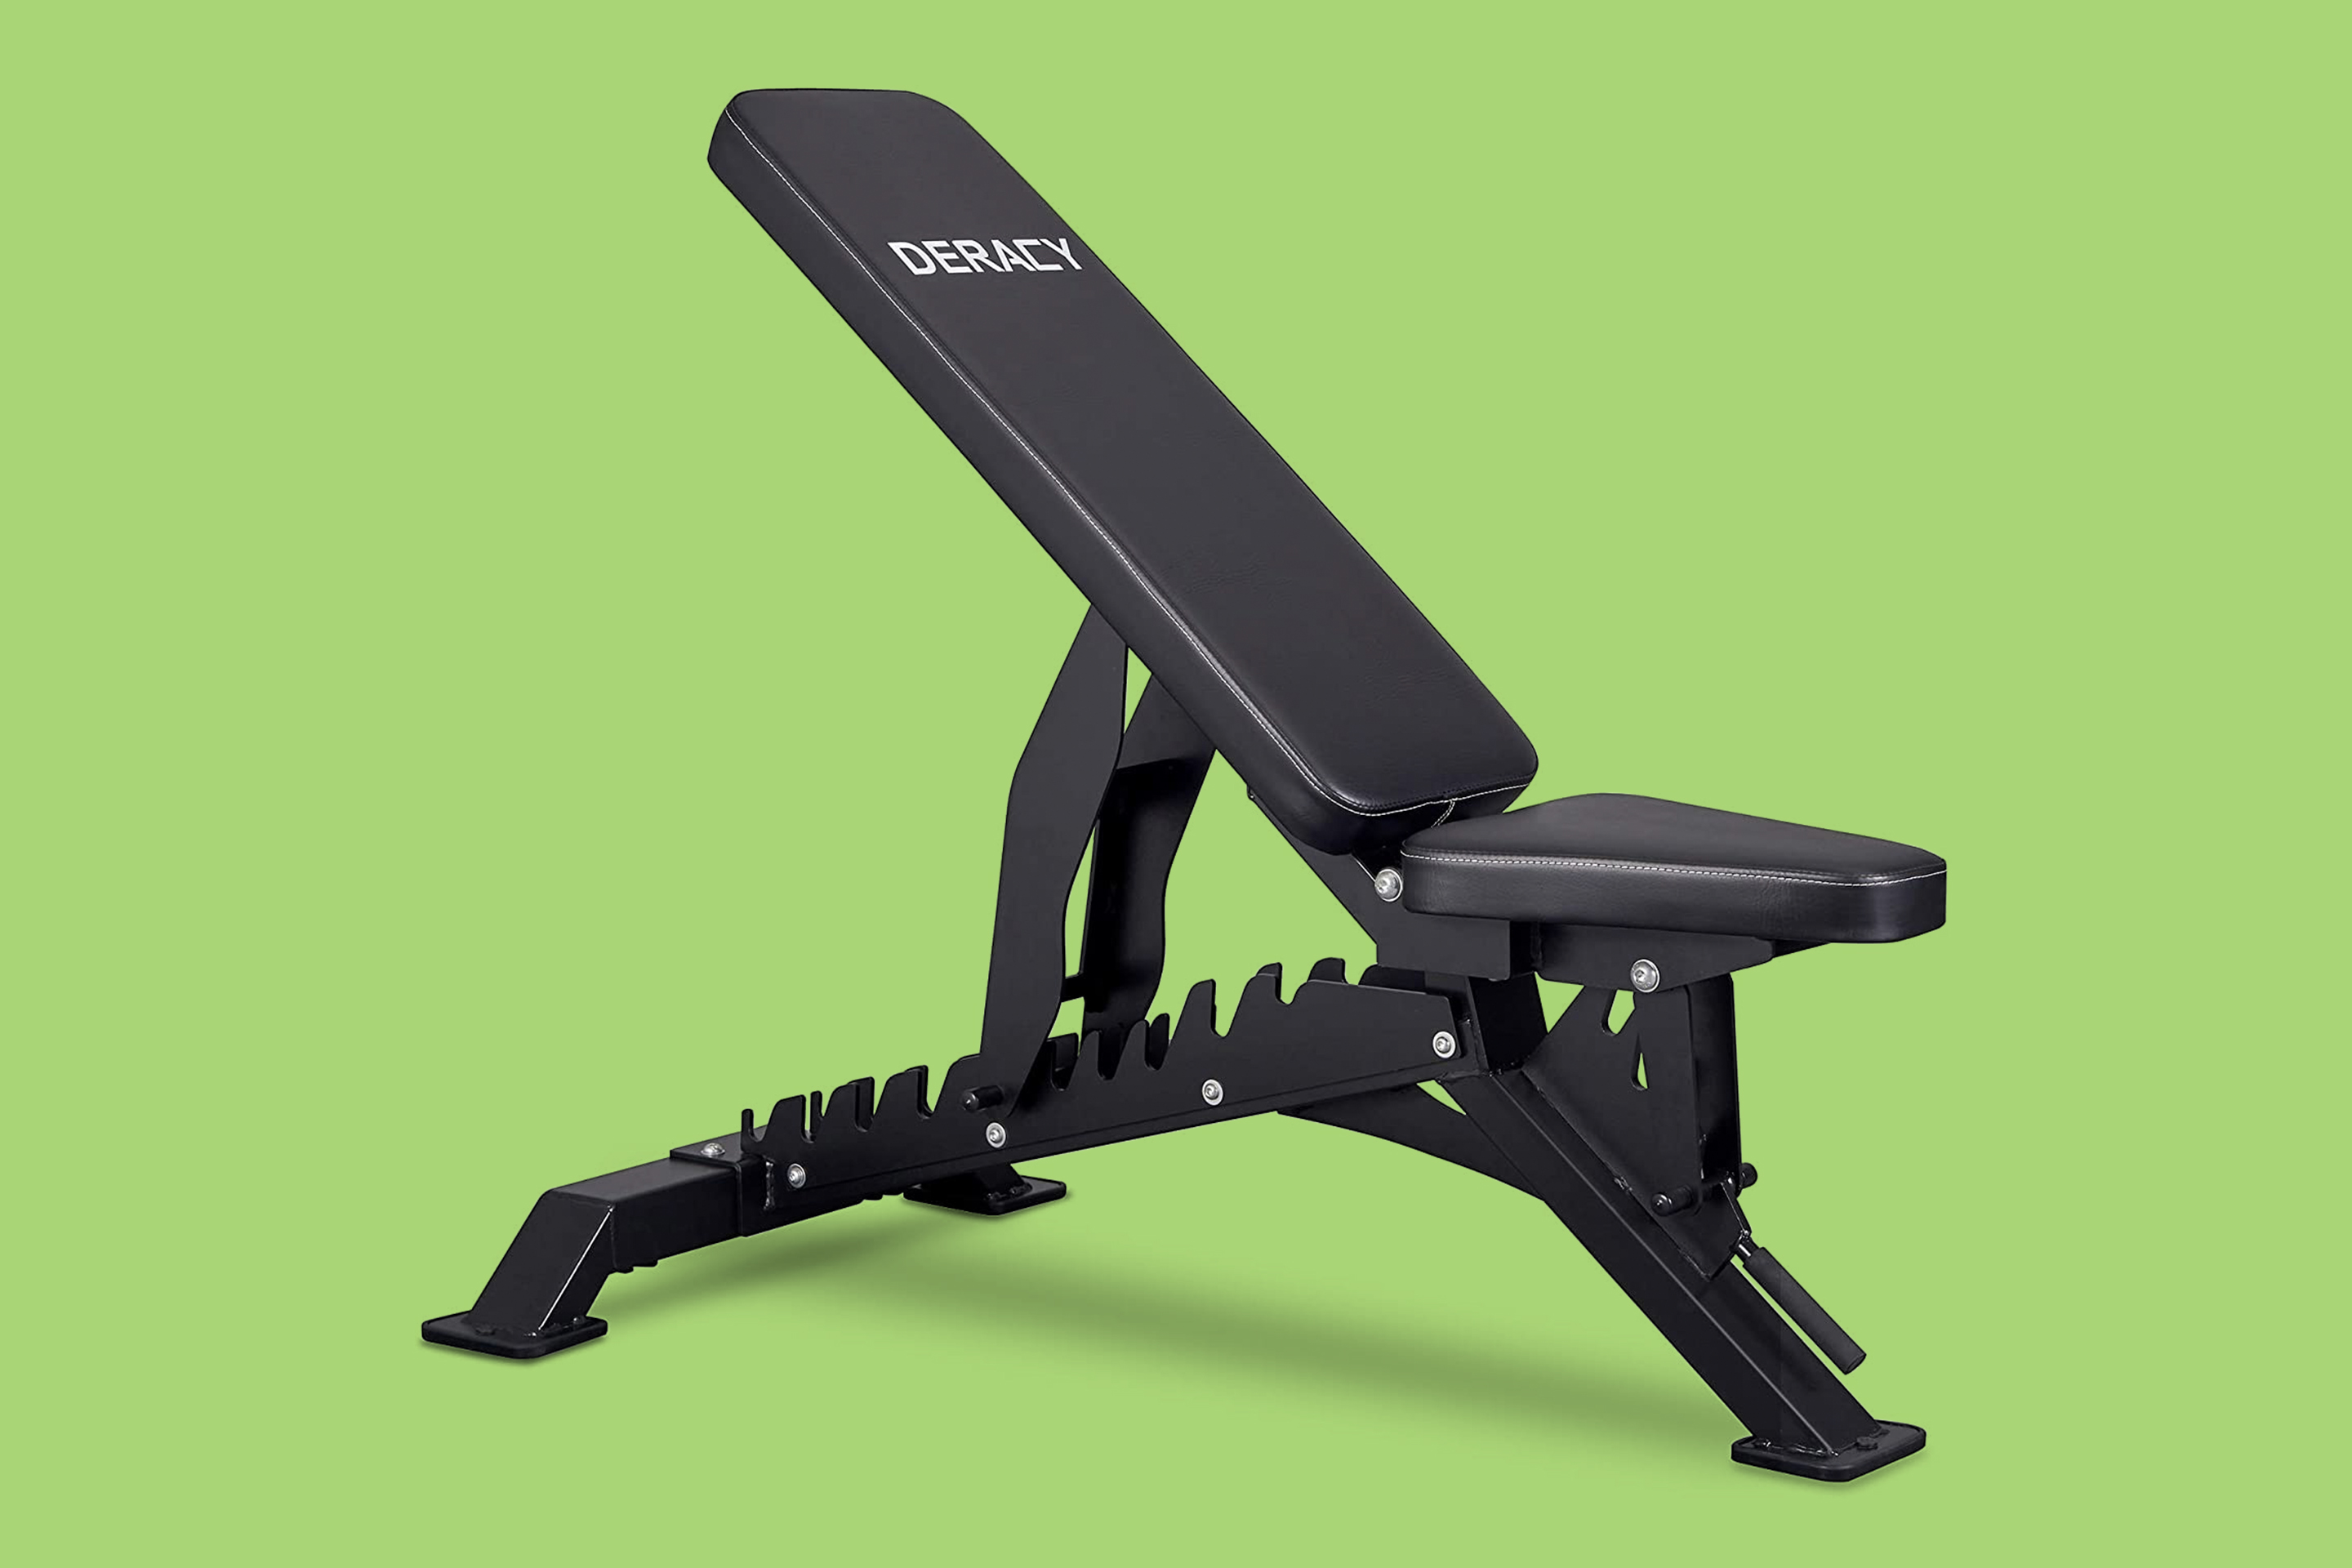 The Best Weight Benches for Your Money